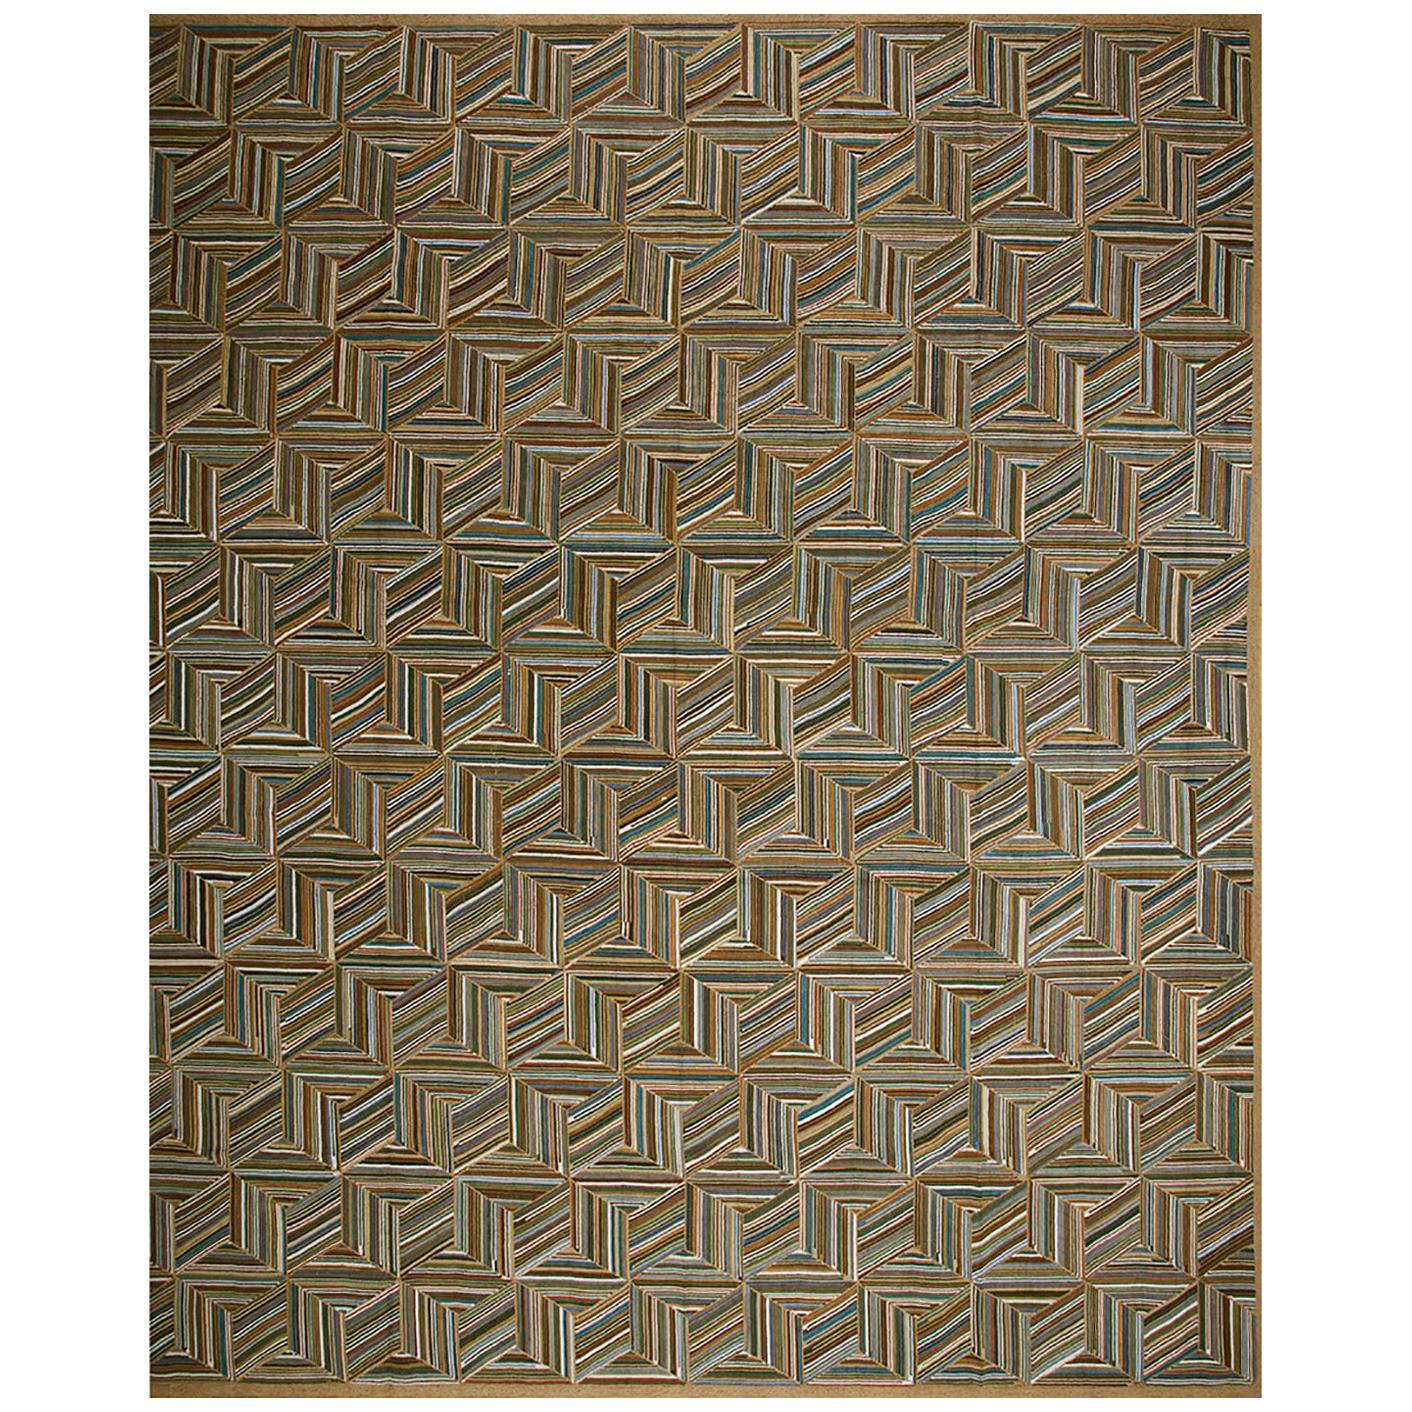 Contemporary American Hooked Rug (6' x 9' - 183x 274)